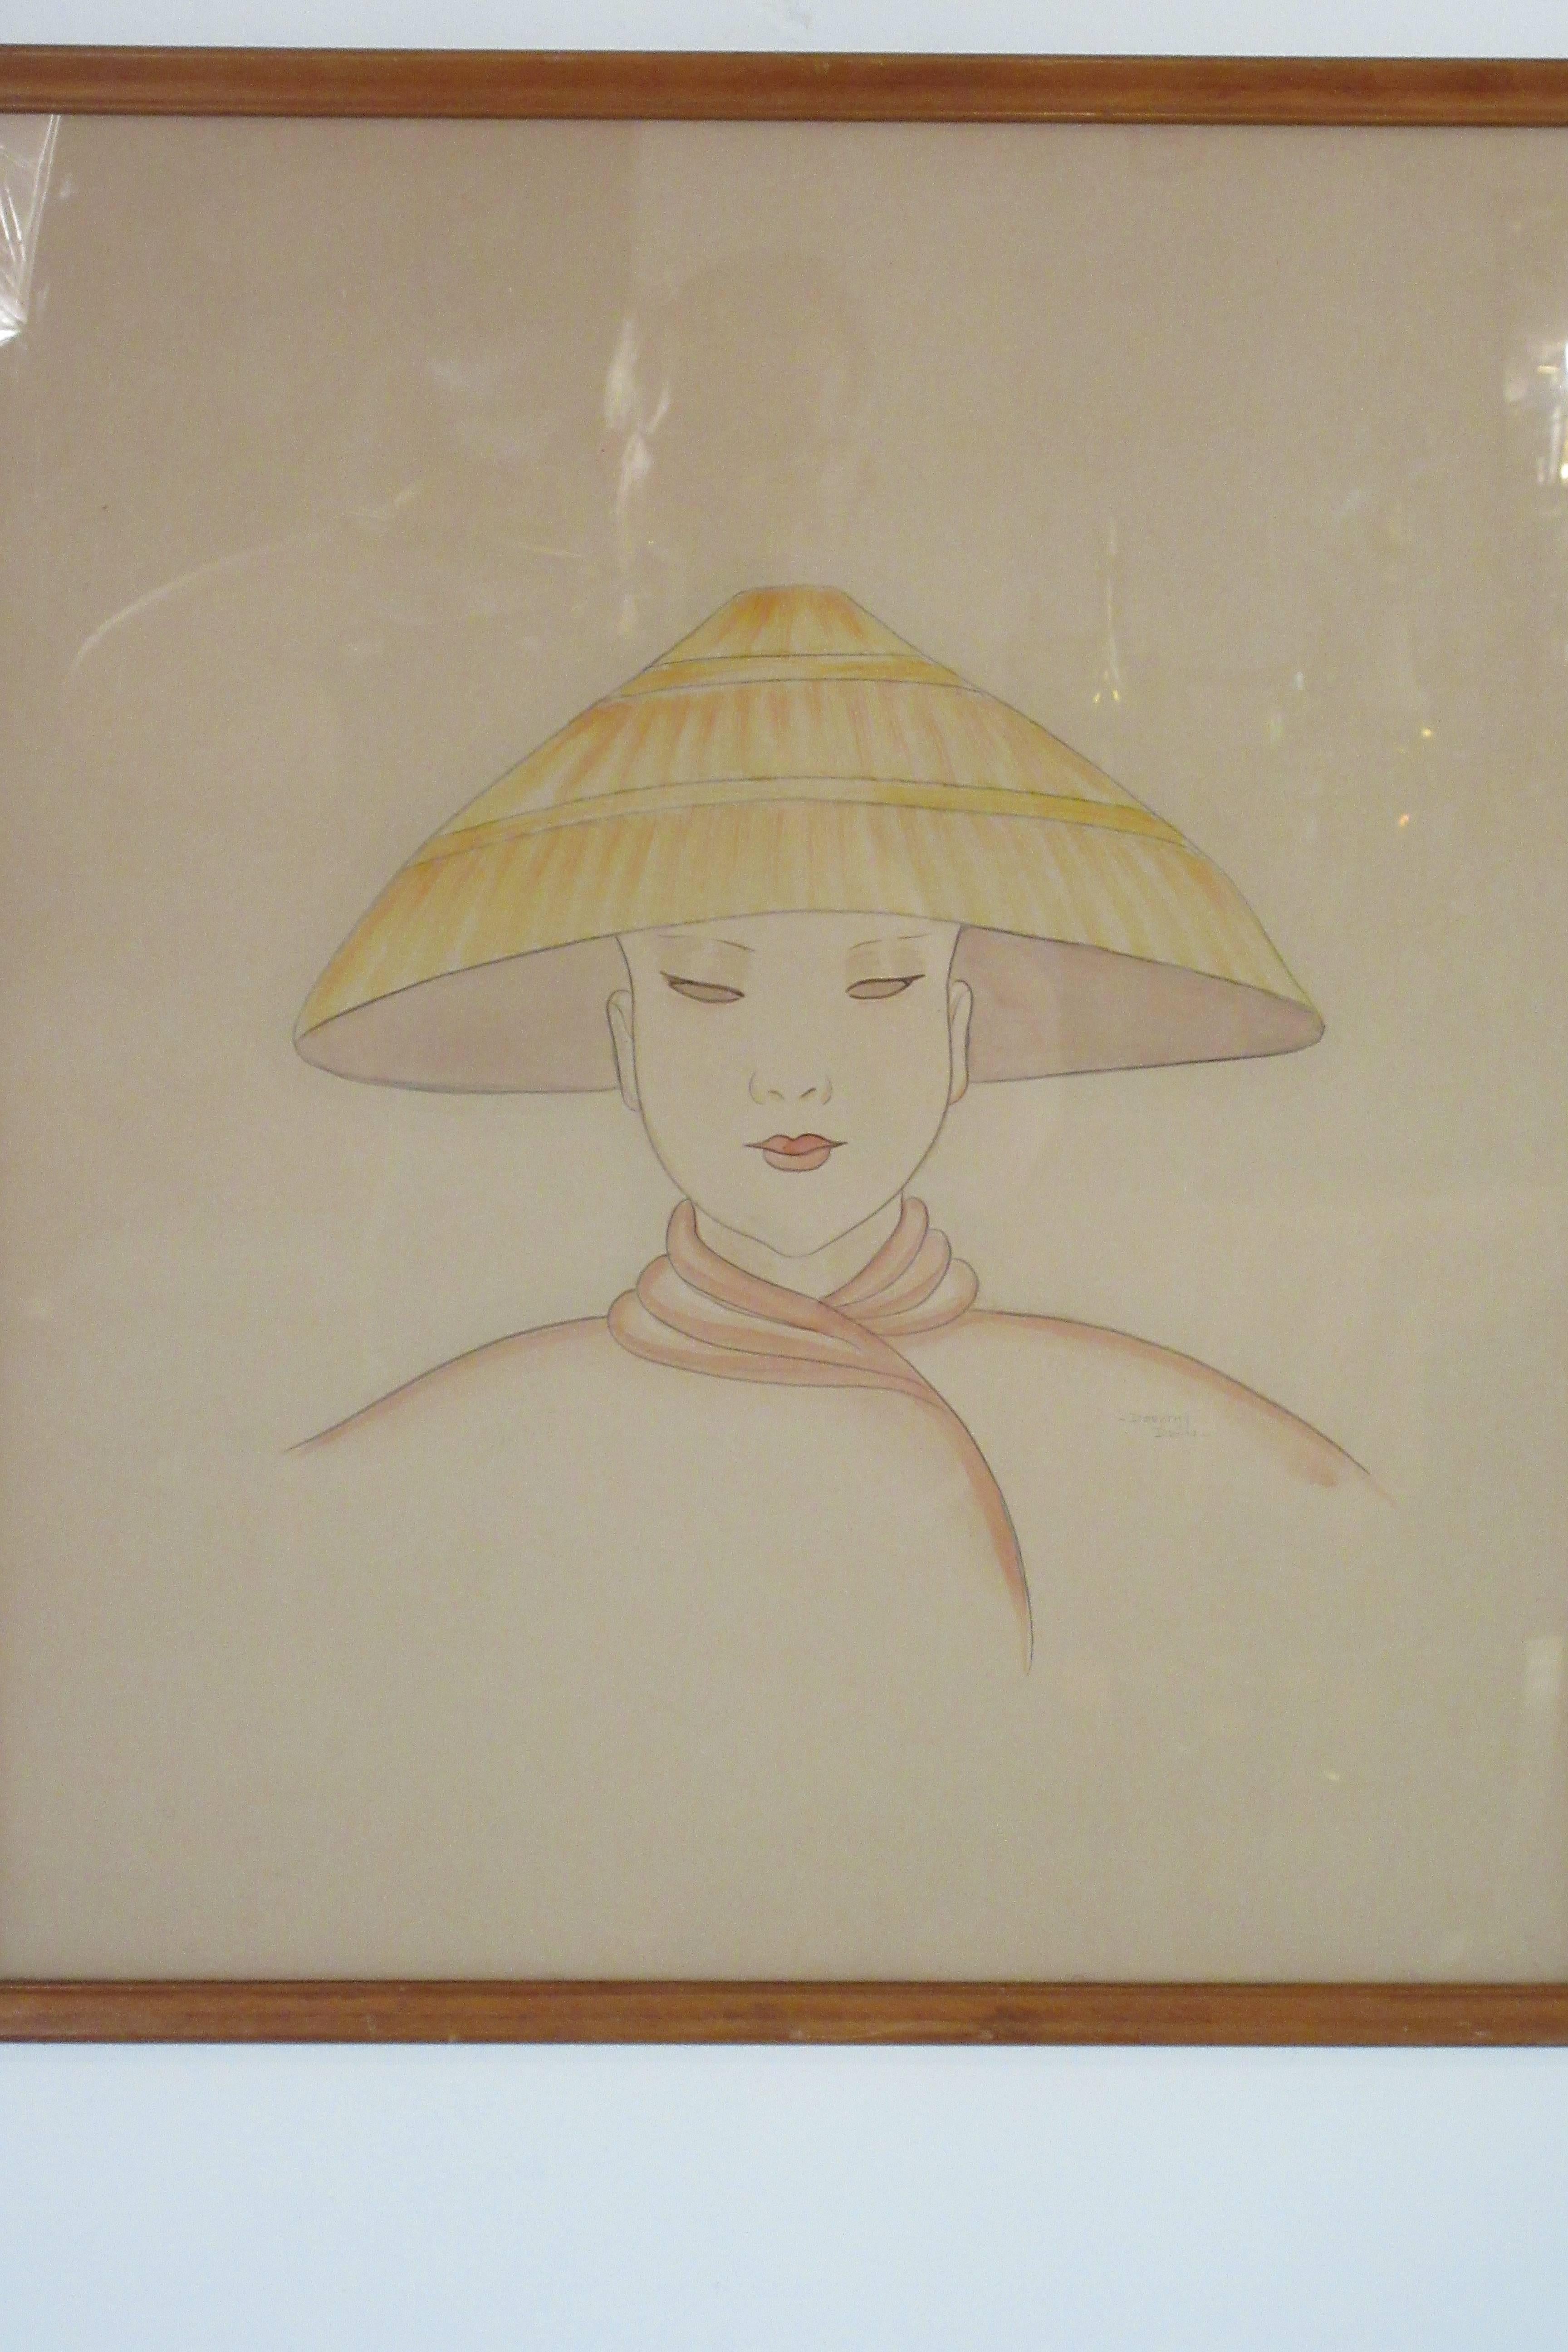 1940s Watercolor Painting On Paper Of Asian Woman Wearing Hat 
Wearing a Nón Lá (traditional Vietnamese hat)
Signed Dorothy Dwin
Illustration